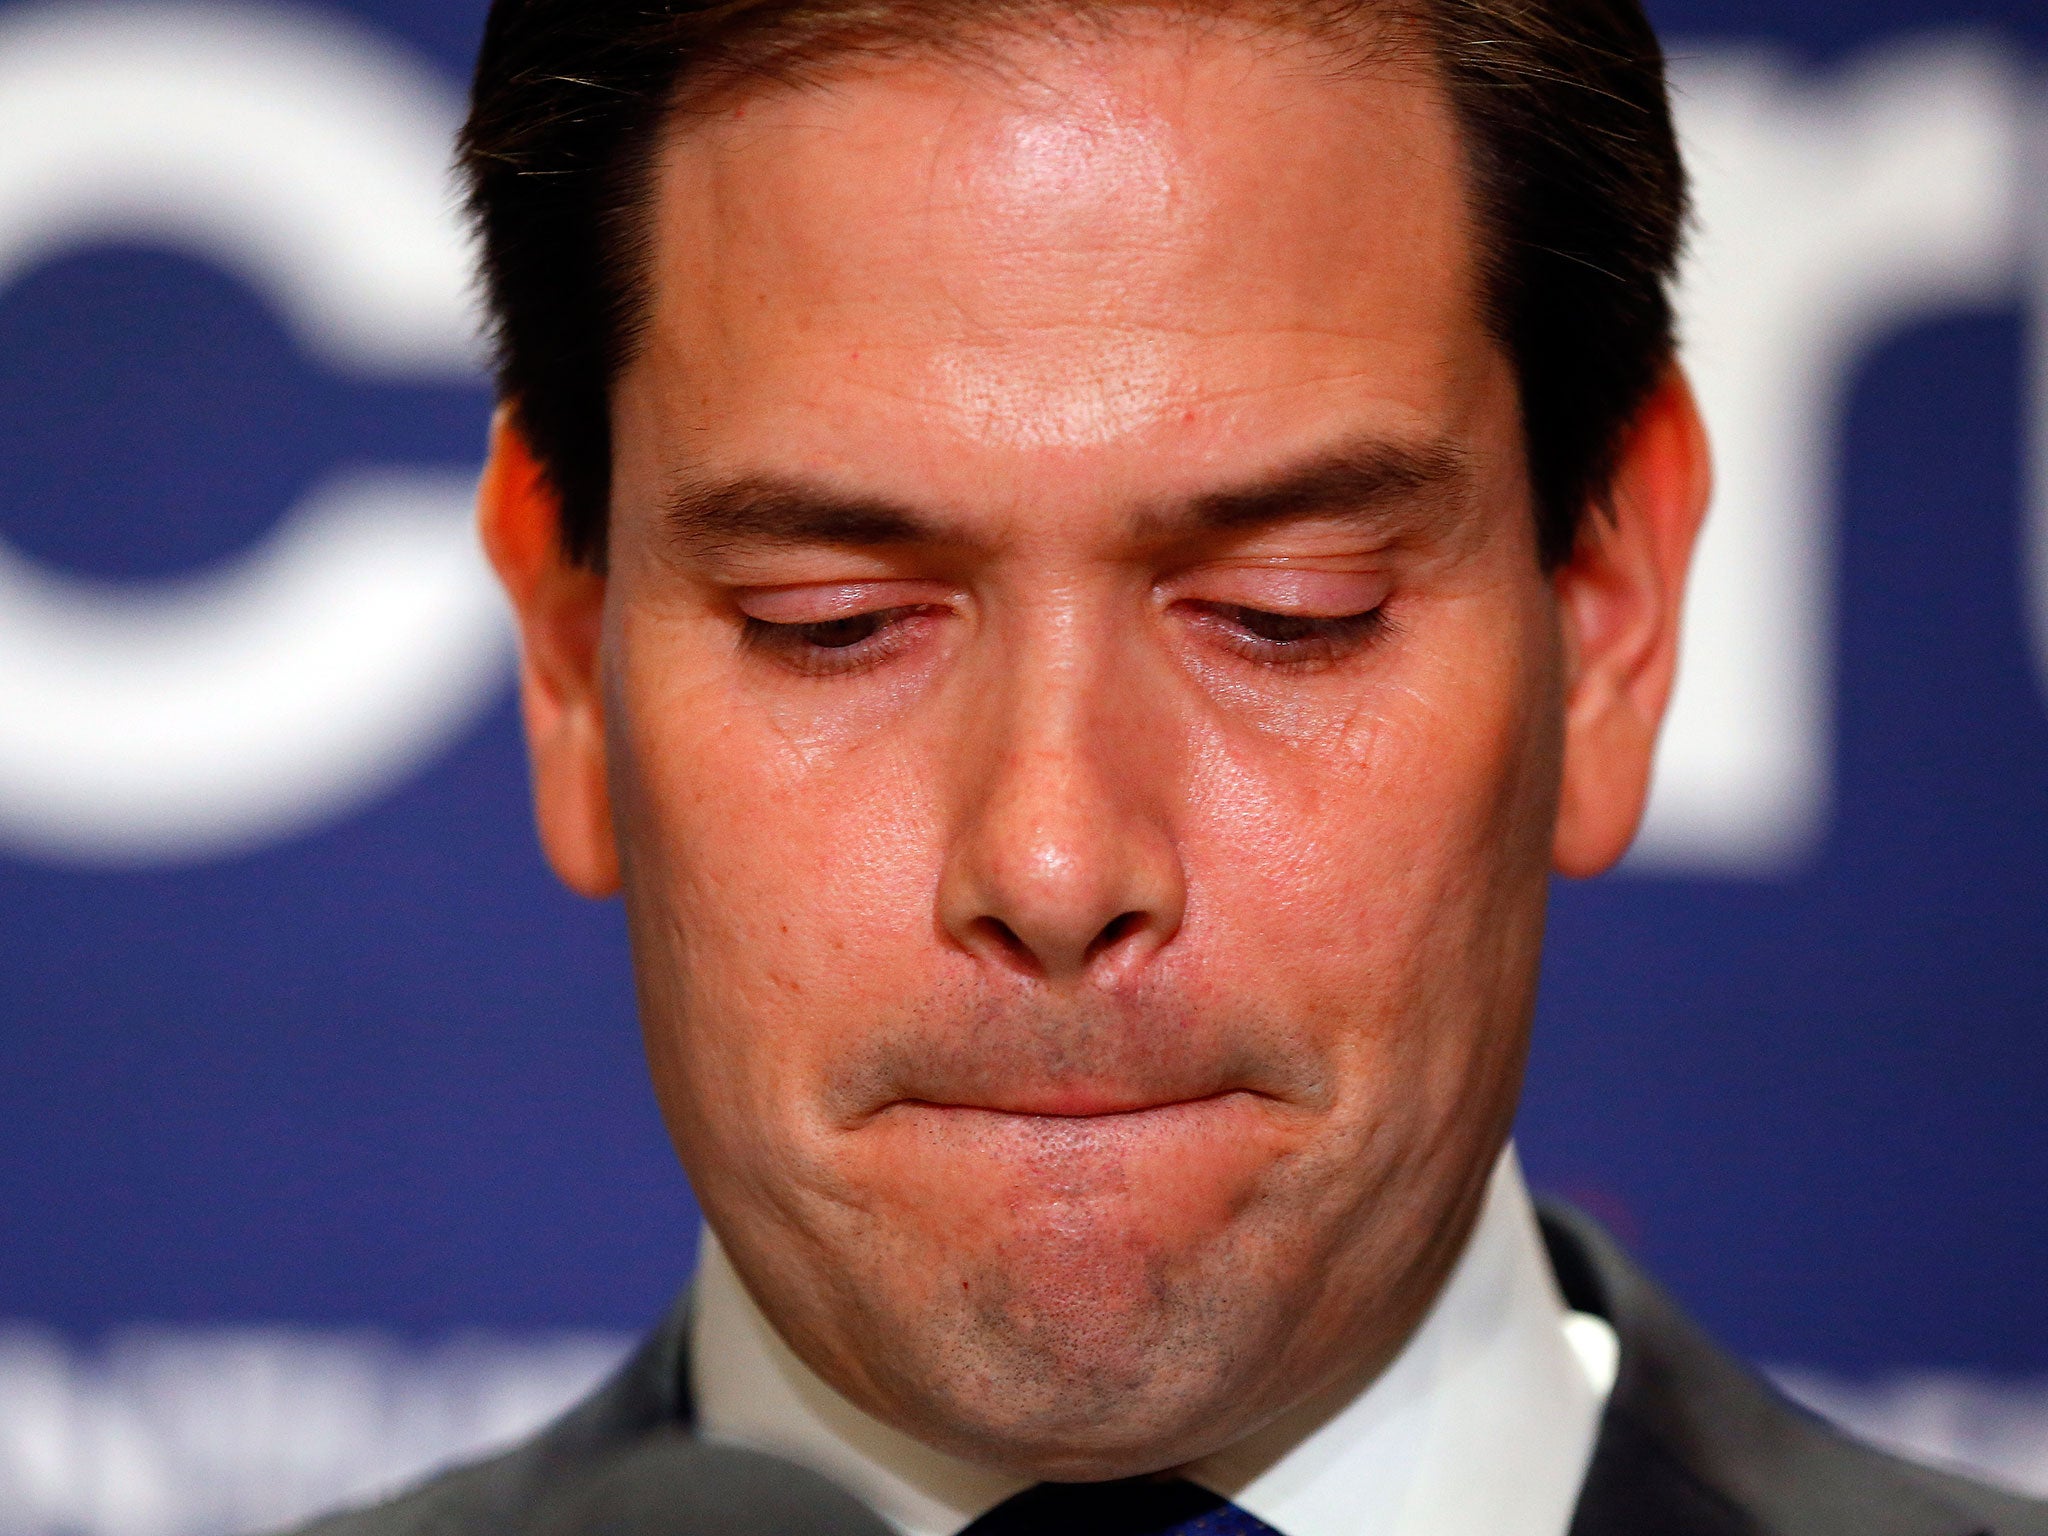 Florida Primary Marco Rubio Drops Out Of Presidential Race After Defeat In His Home State The